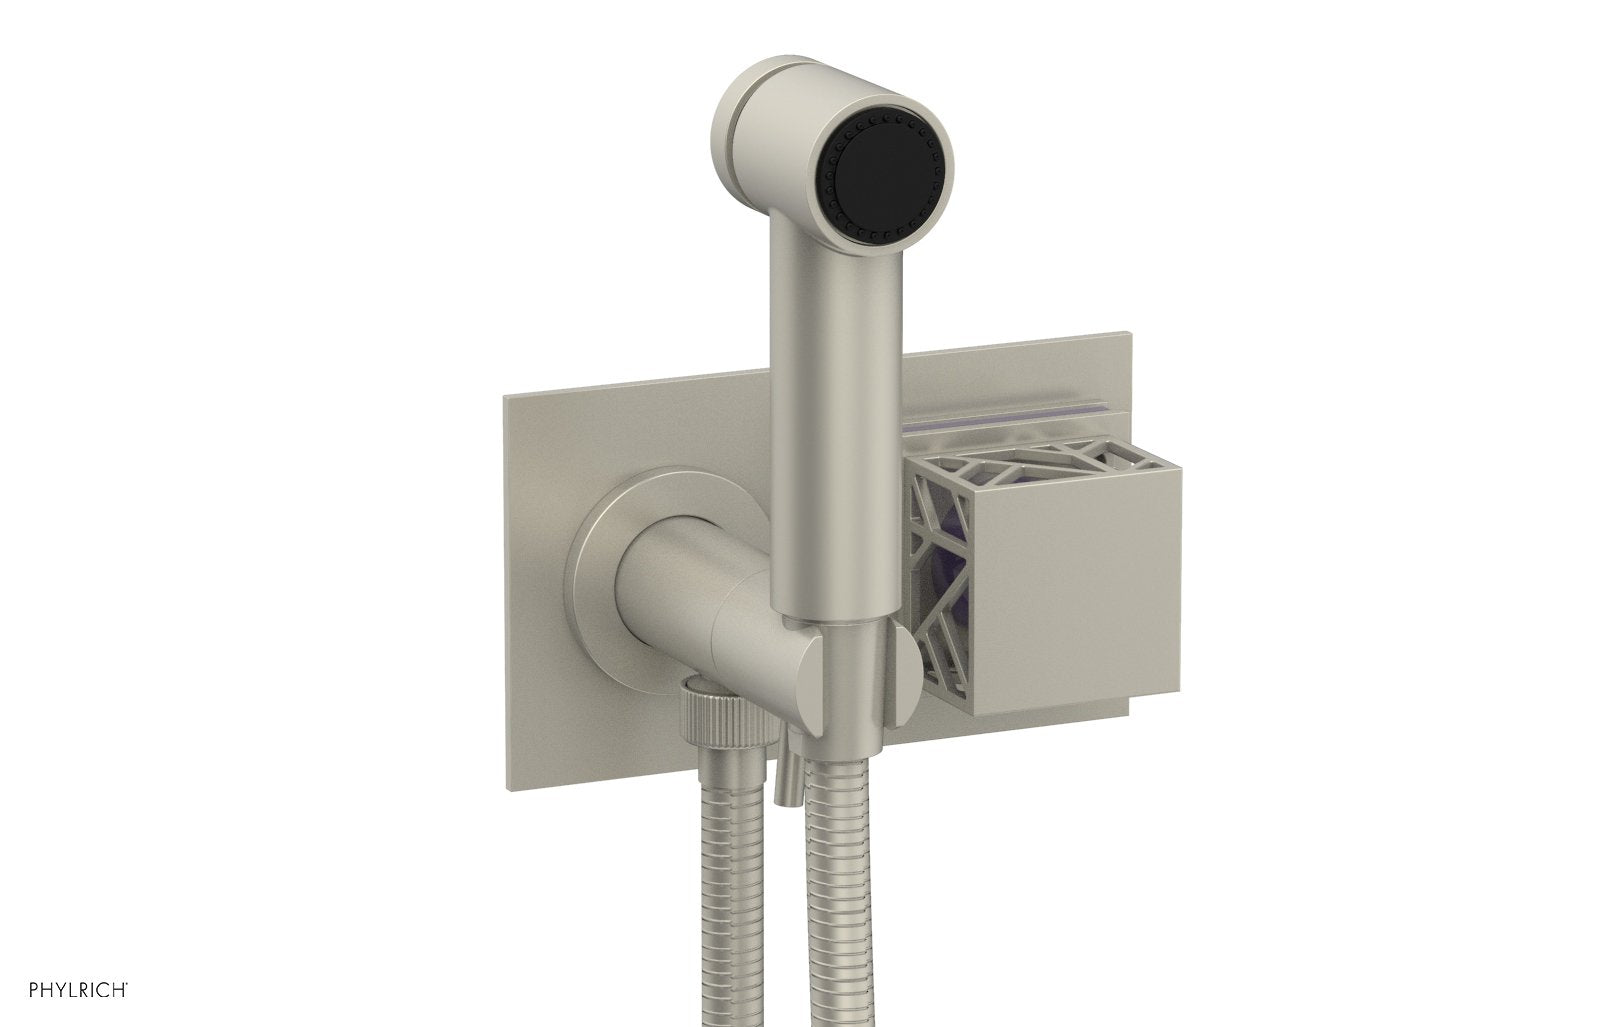 Phylrich JOLIE Wall Mounted Bidet, Square Handle with "Purple" Accents